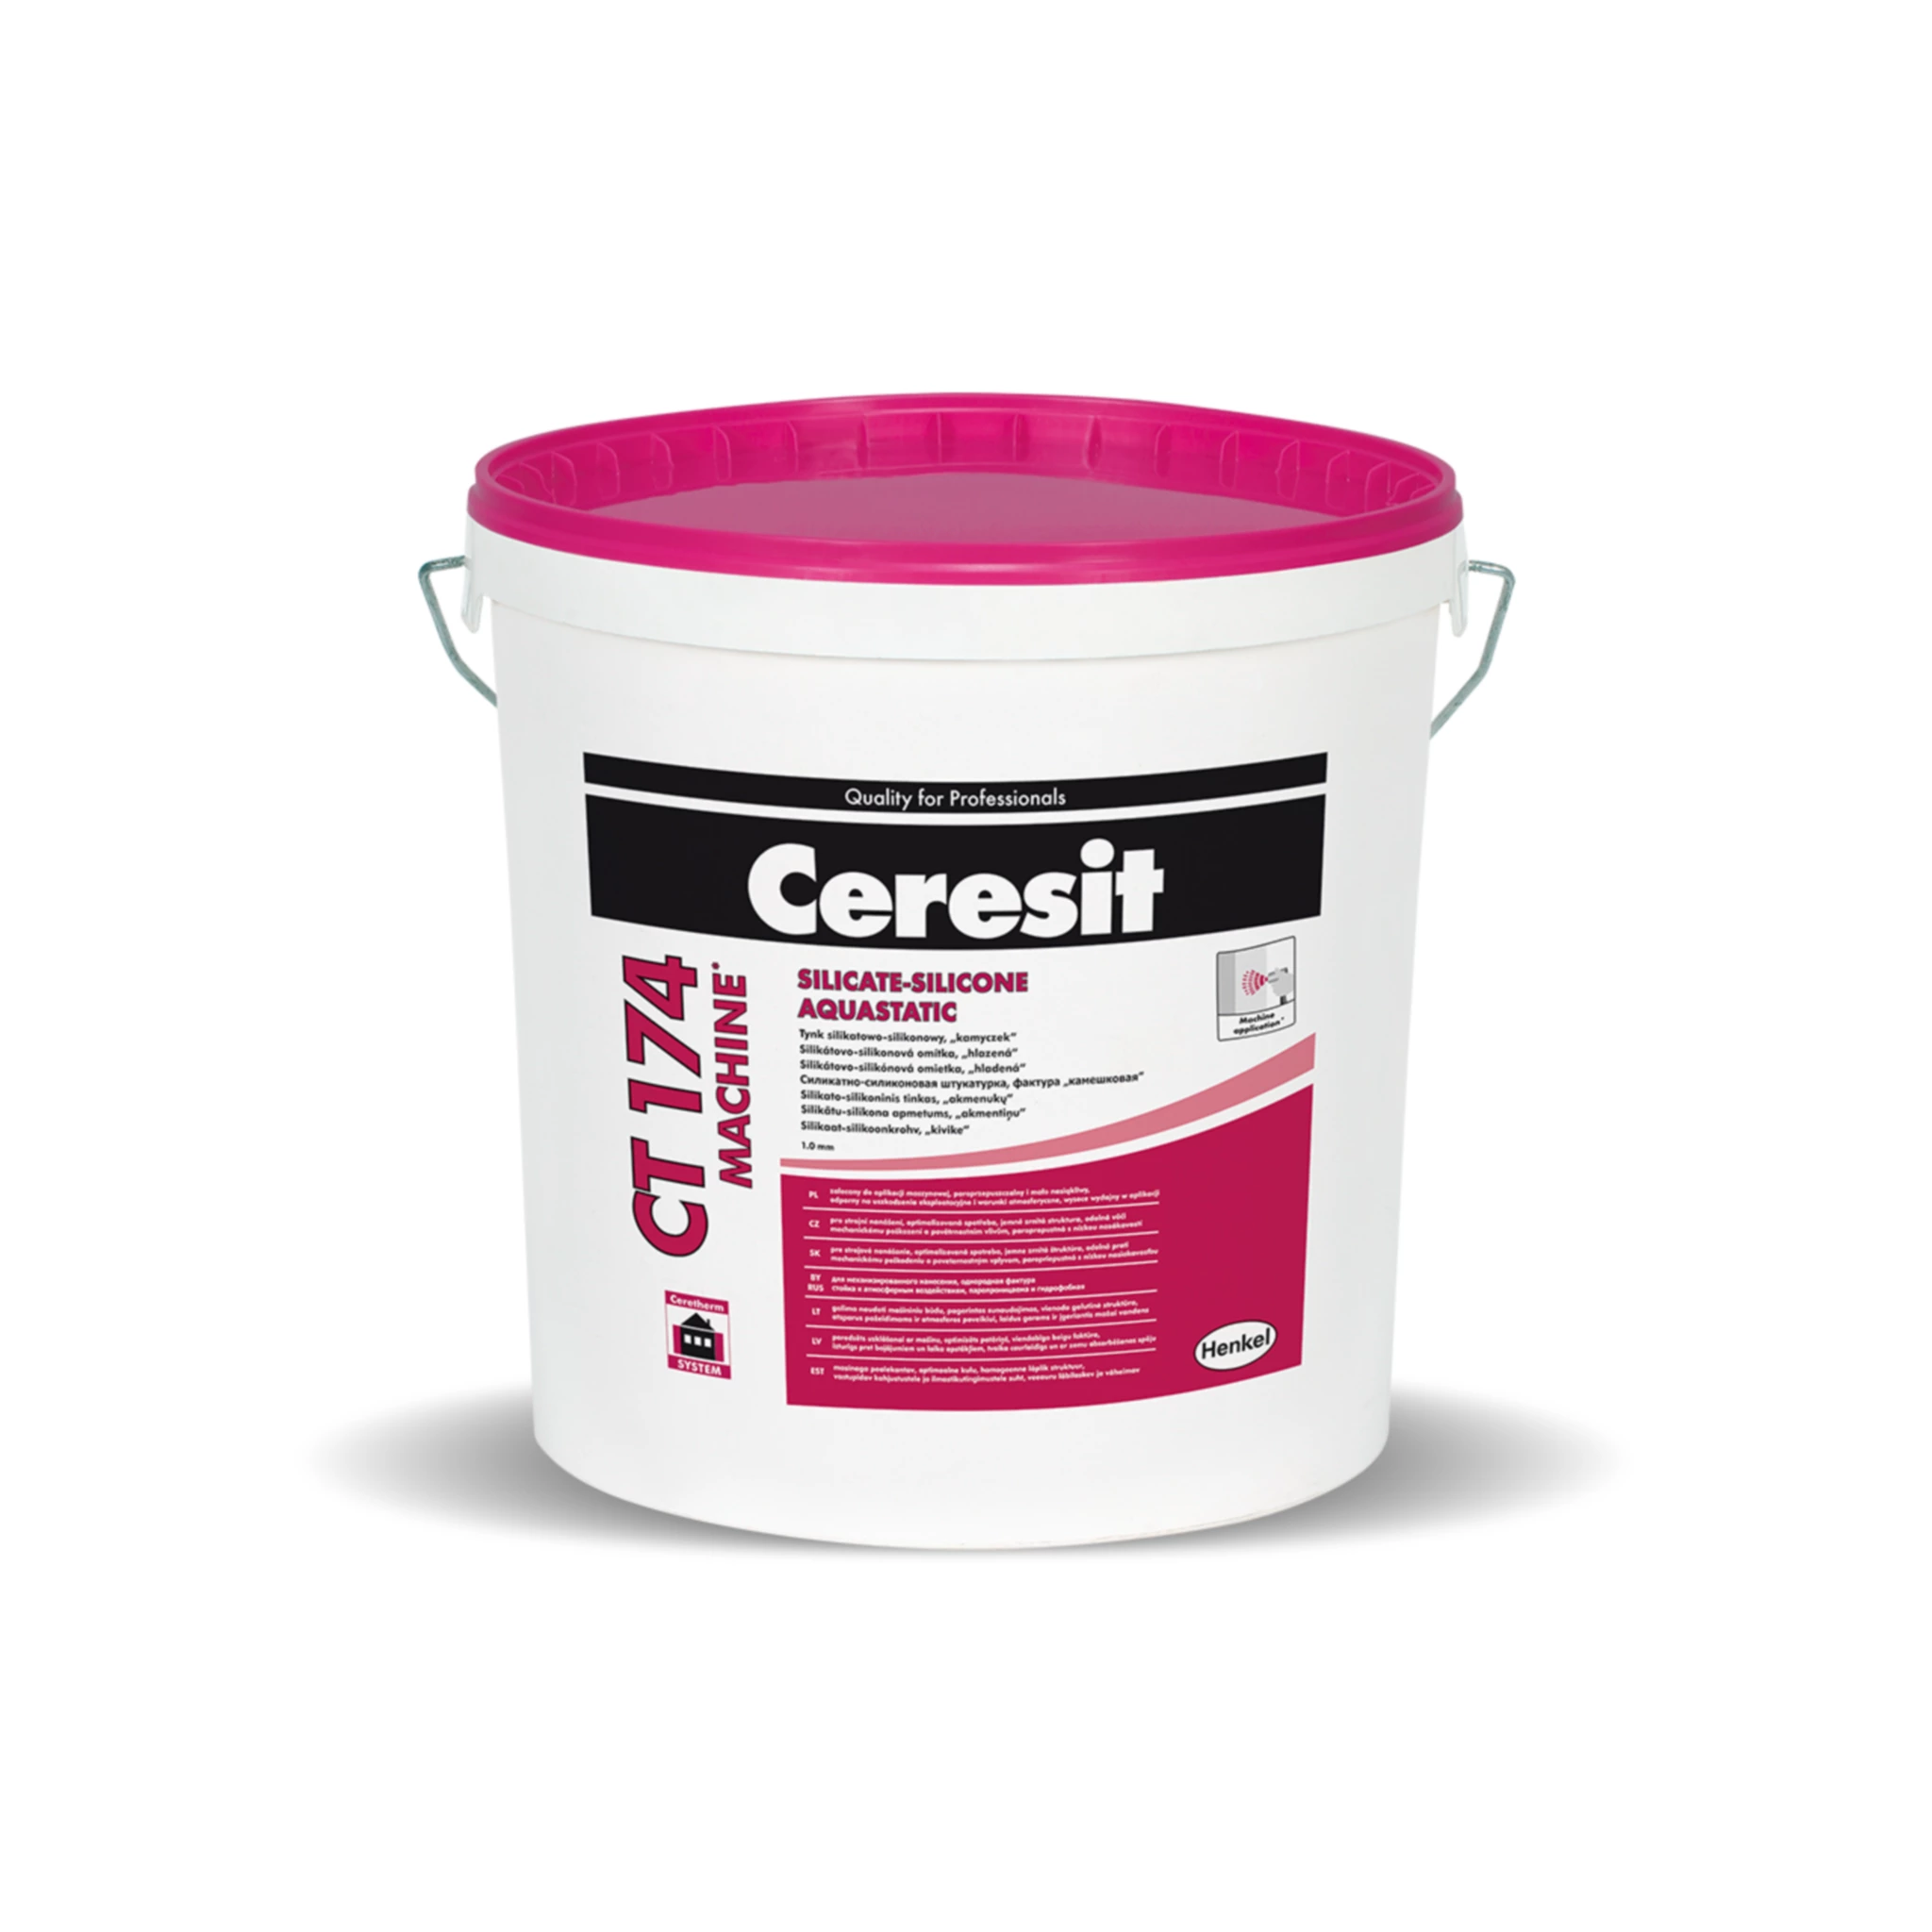 Ceresit CT174 Silicate-silicone plaster, stone like structure, grain 1.0mm, 25Kg